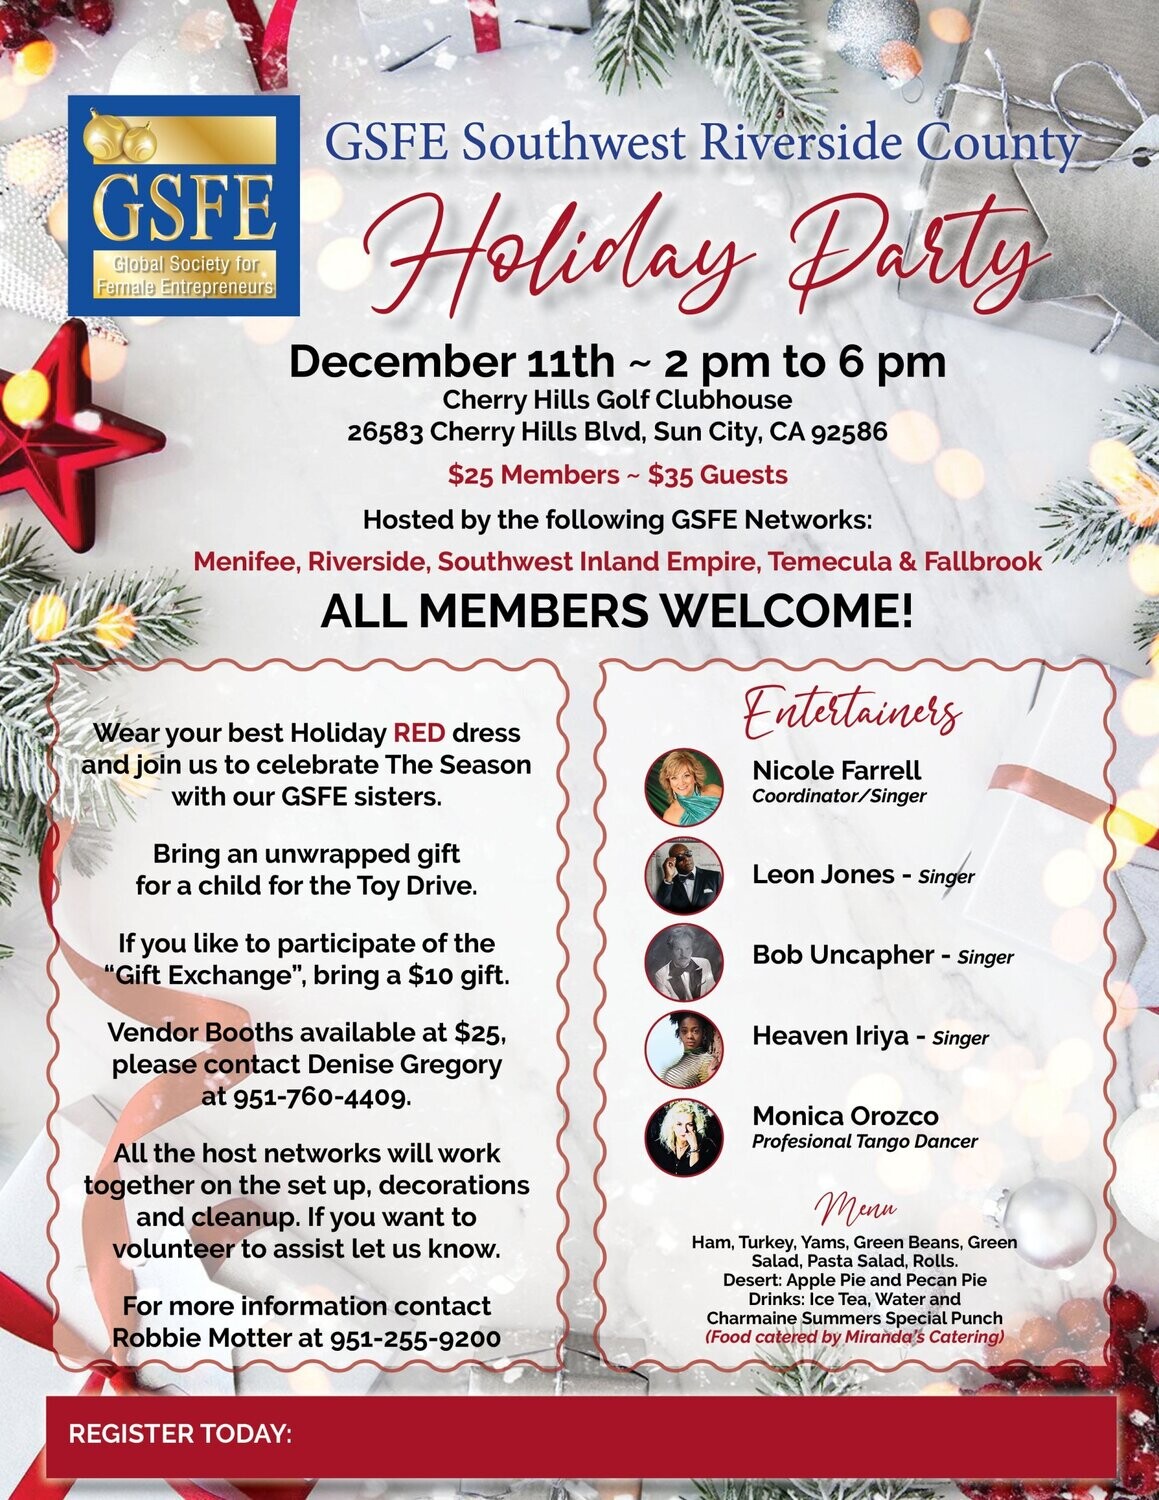 Z - 1A-GSFE Southwest Riverside County - Holiday Party (MEMBERS)